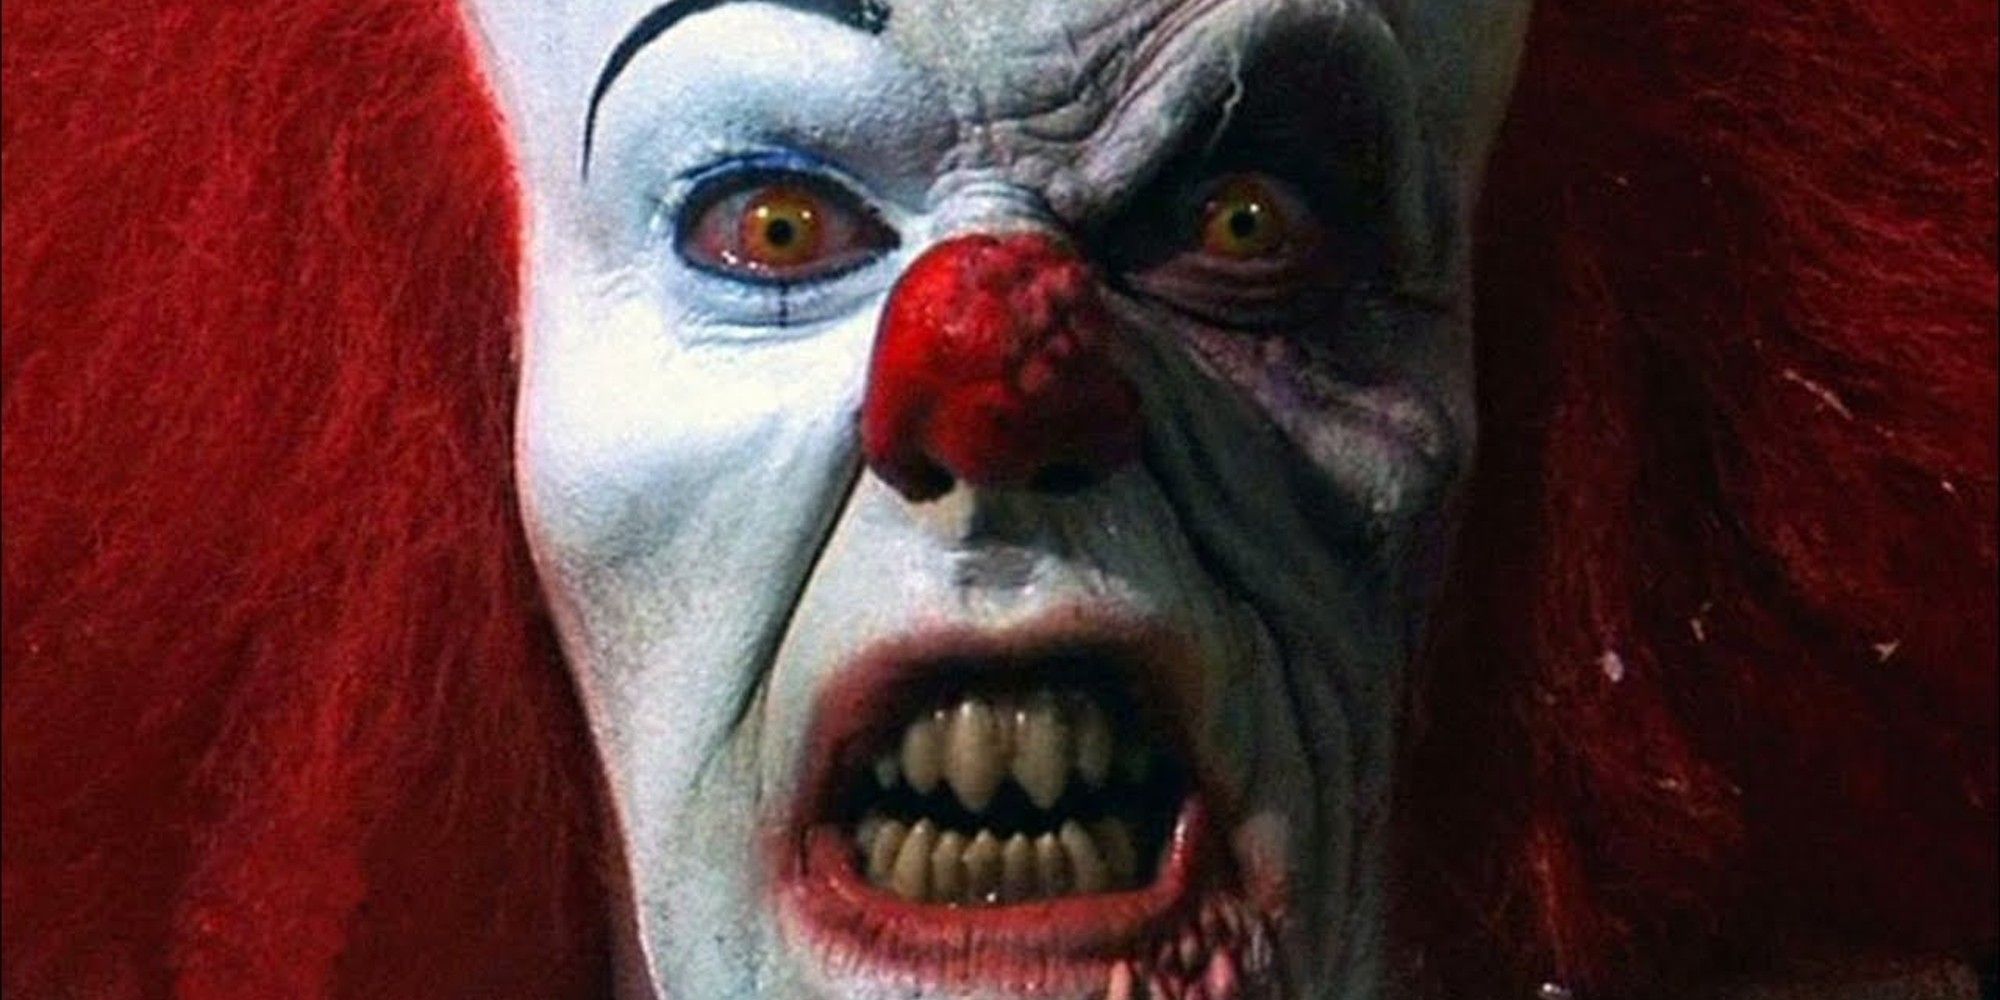 Pennywise in IT 1990 looking menacing and staring with teeth out